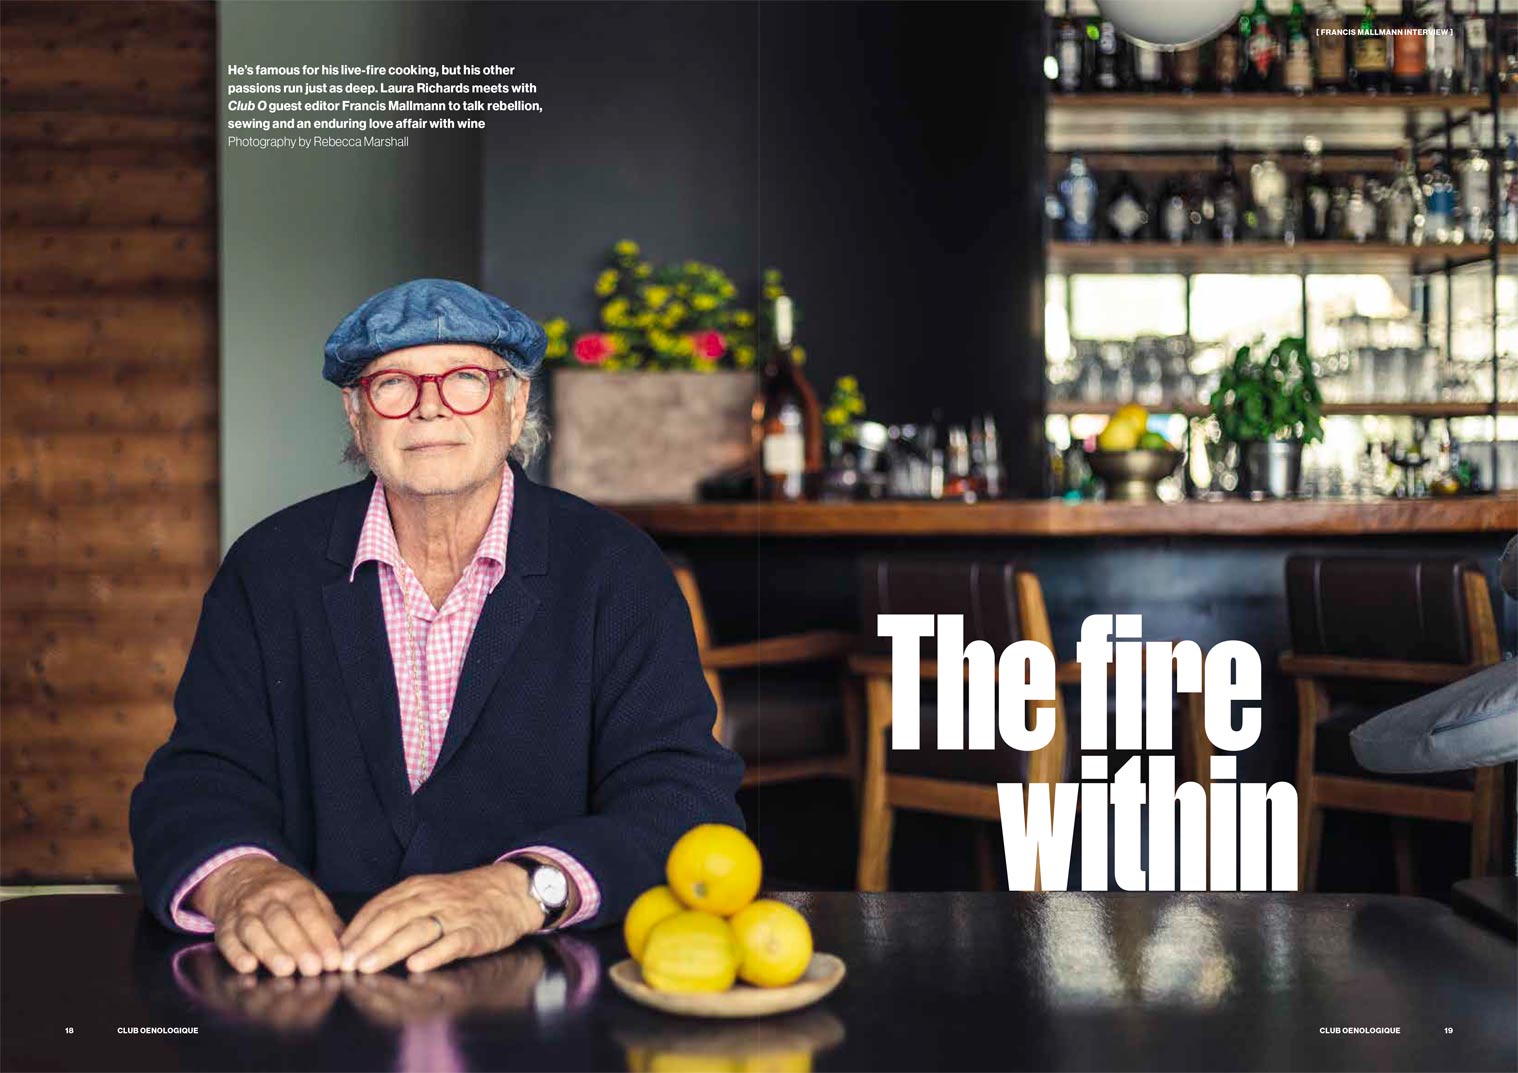 Double title page spread in Club Oenologique magazine, a full bleed portrait of chef Francis Mallmann, seated at a table